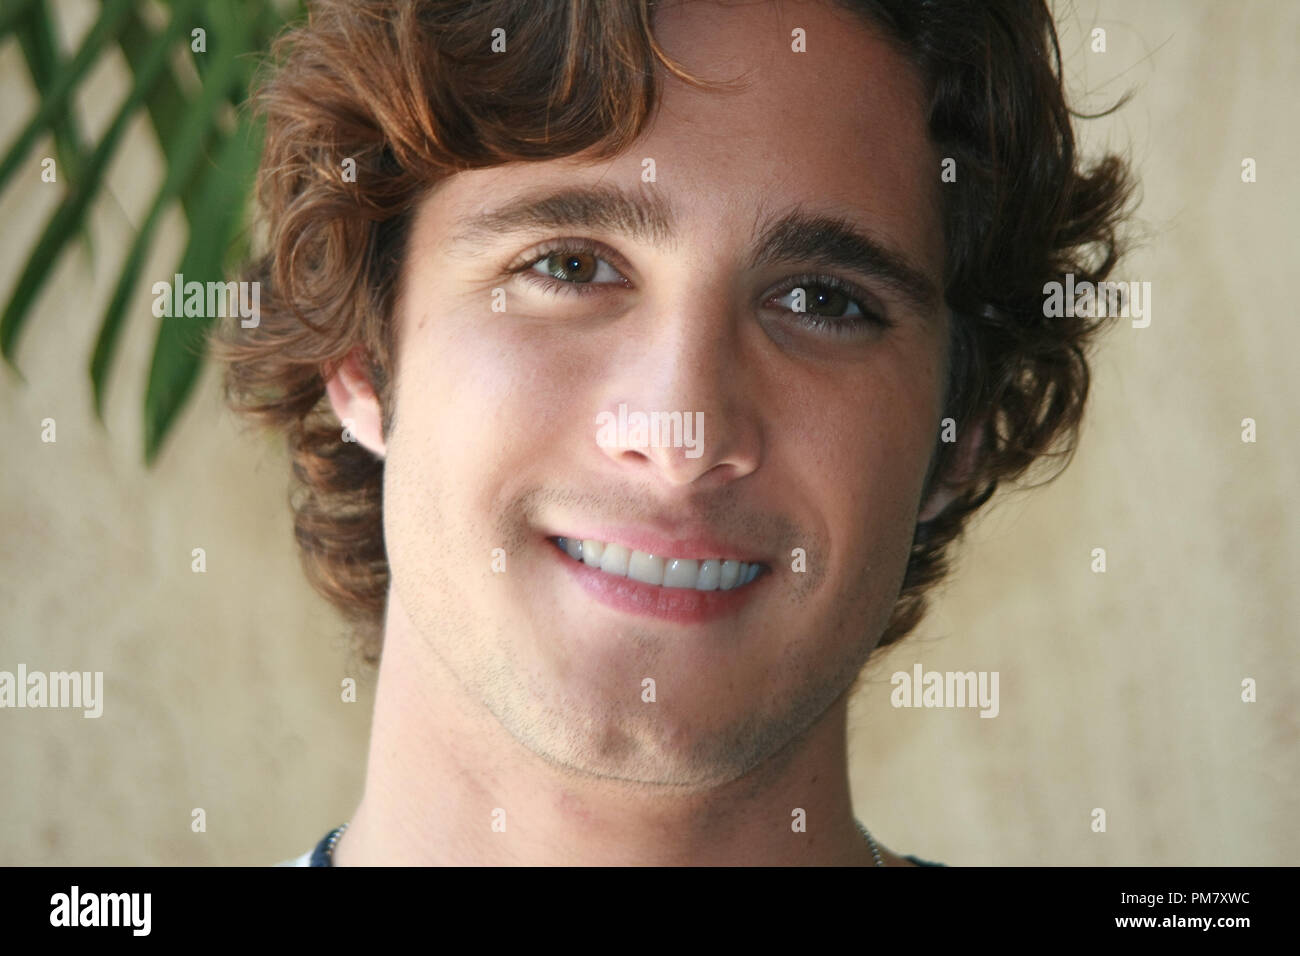 Diego Boneta Rock Of Ages Portrait Session June 8 2012 Reproduction By American Tabloids Is 7317